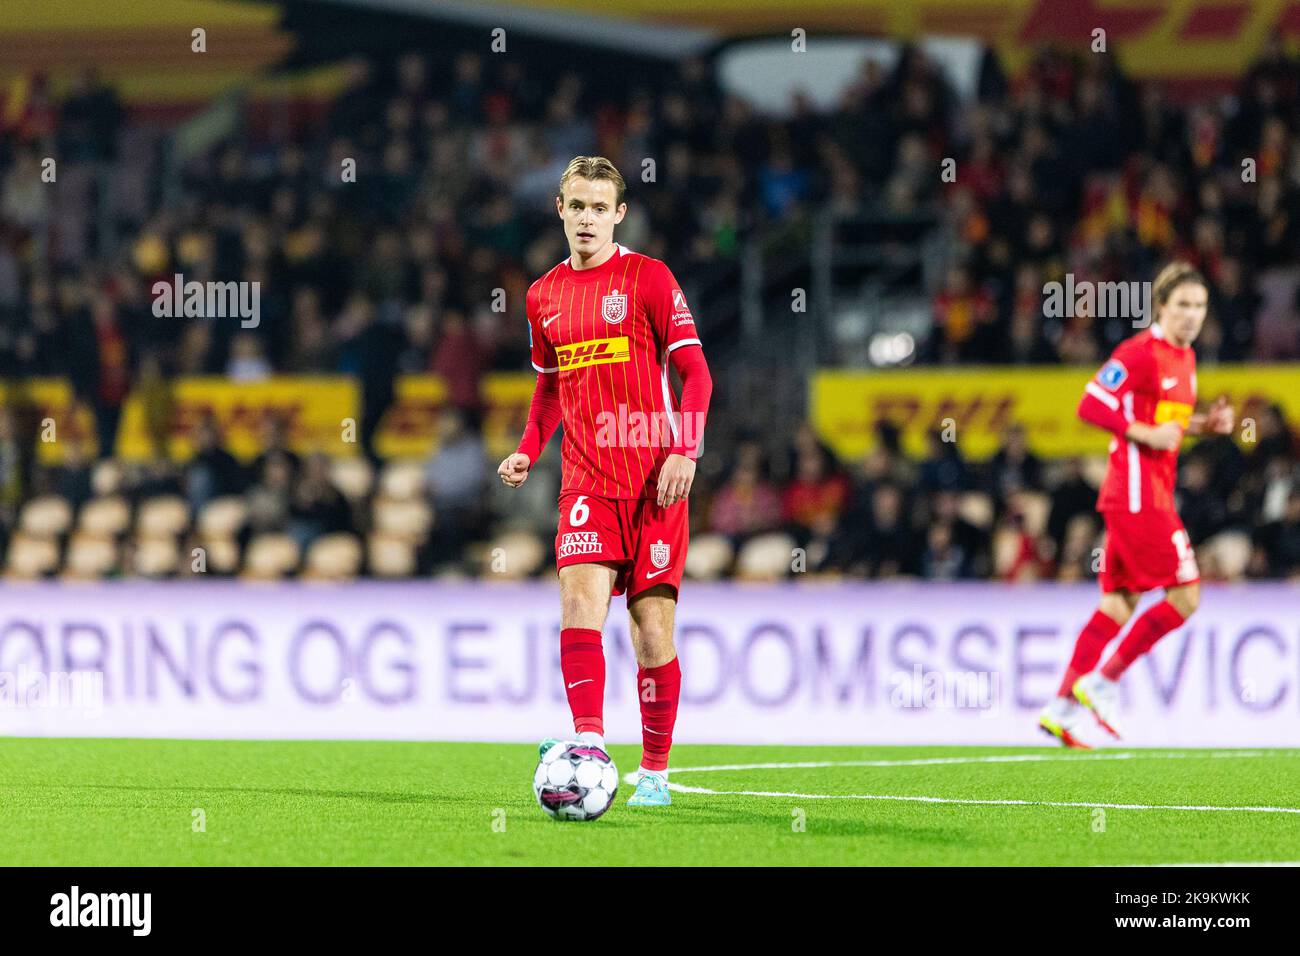 Fc nordsjaelland ac horsens hi-res stock and images - Page - Alamy